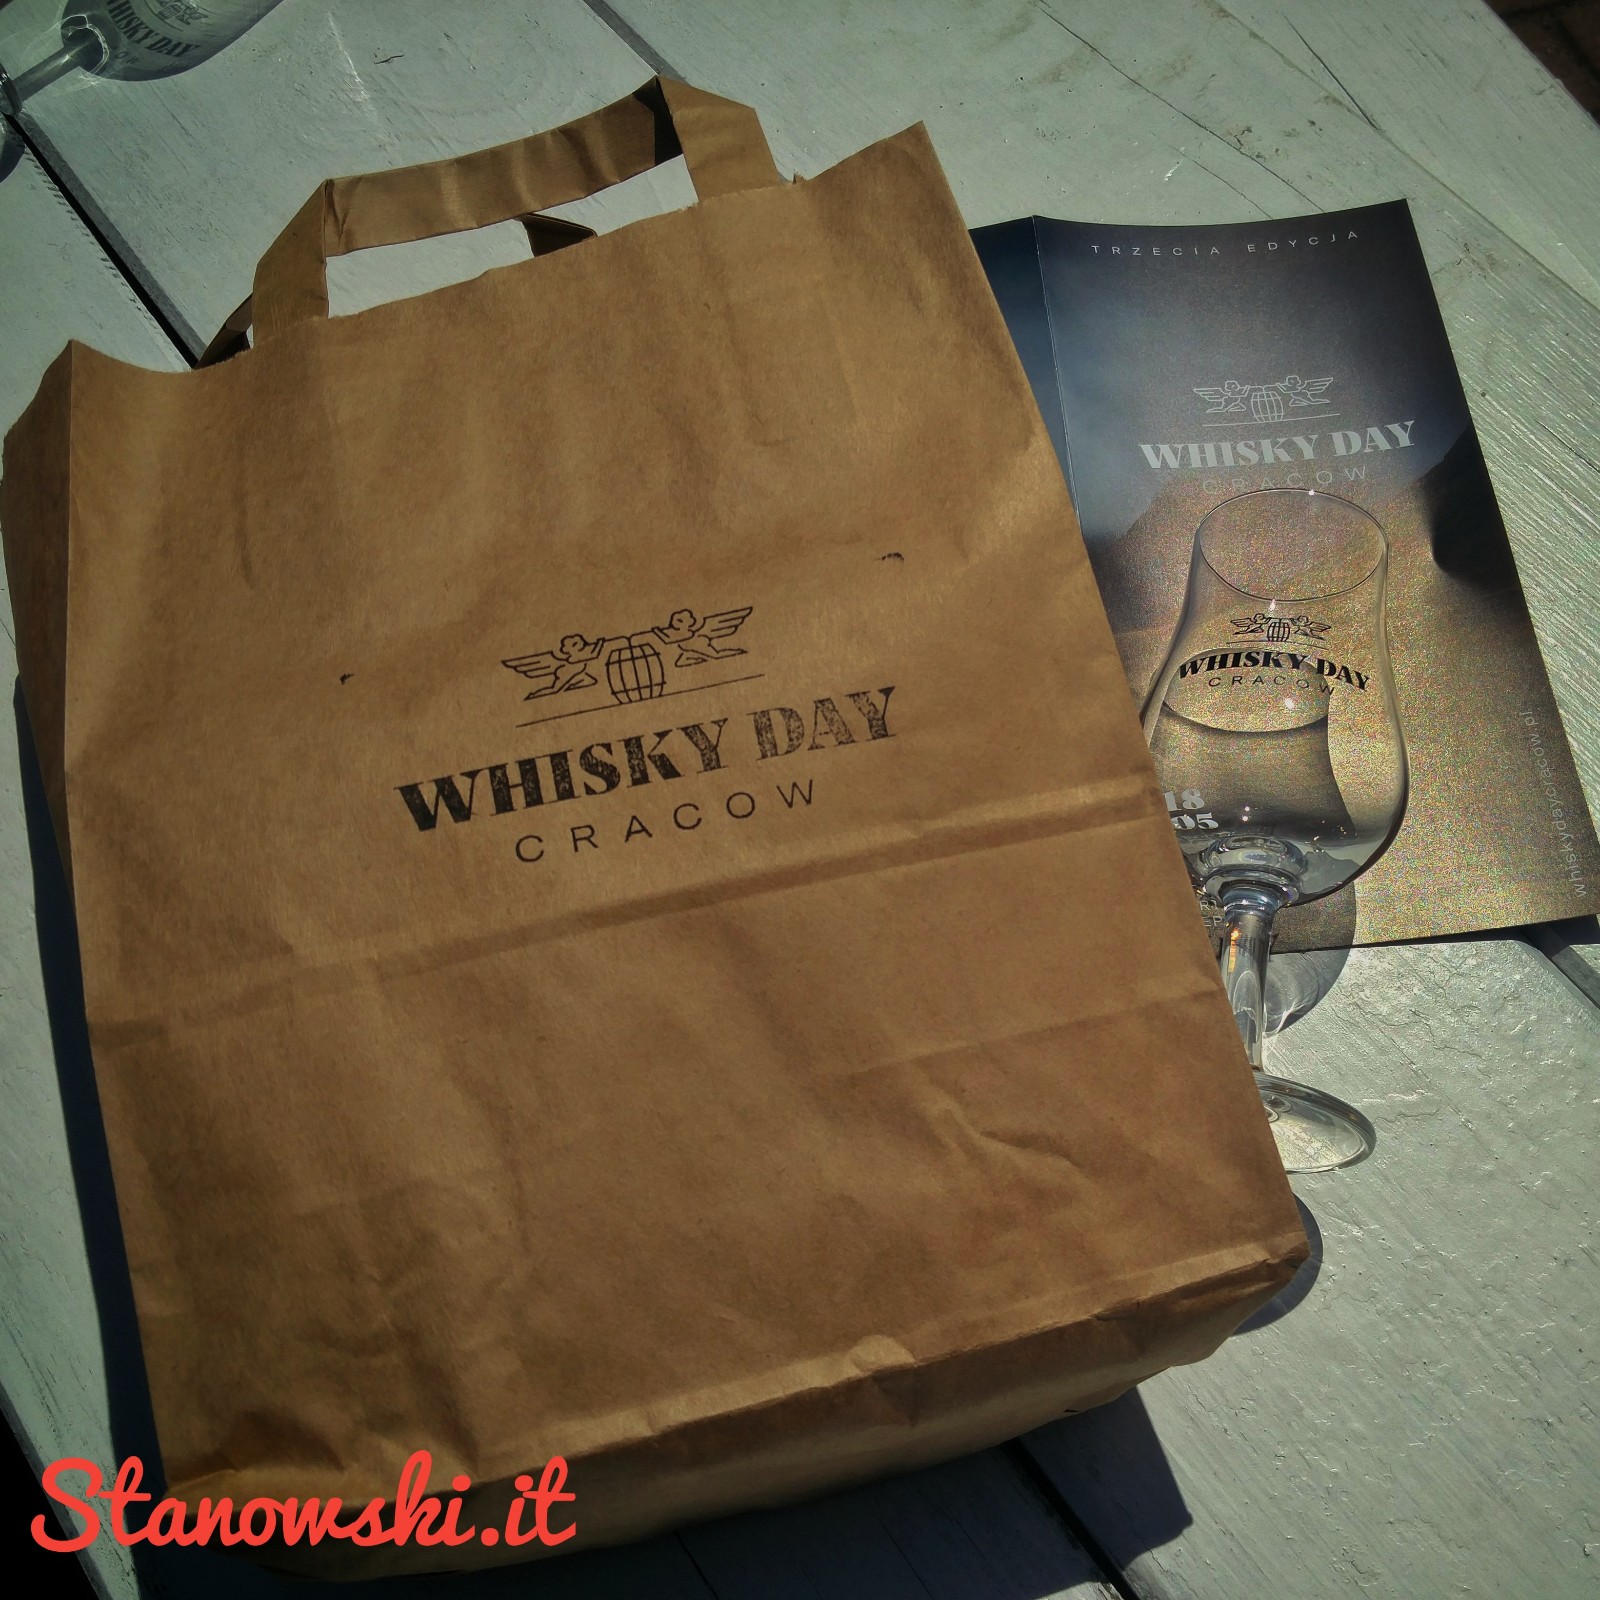 Cracow Whisky Day 2019